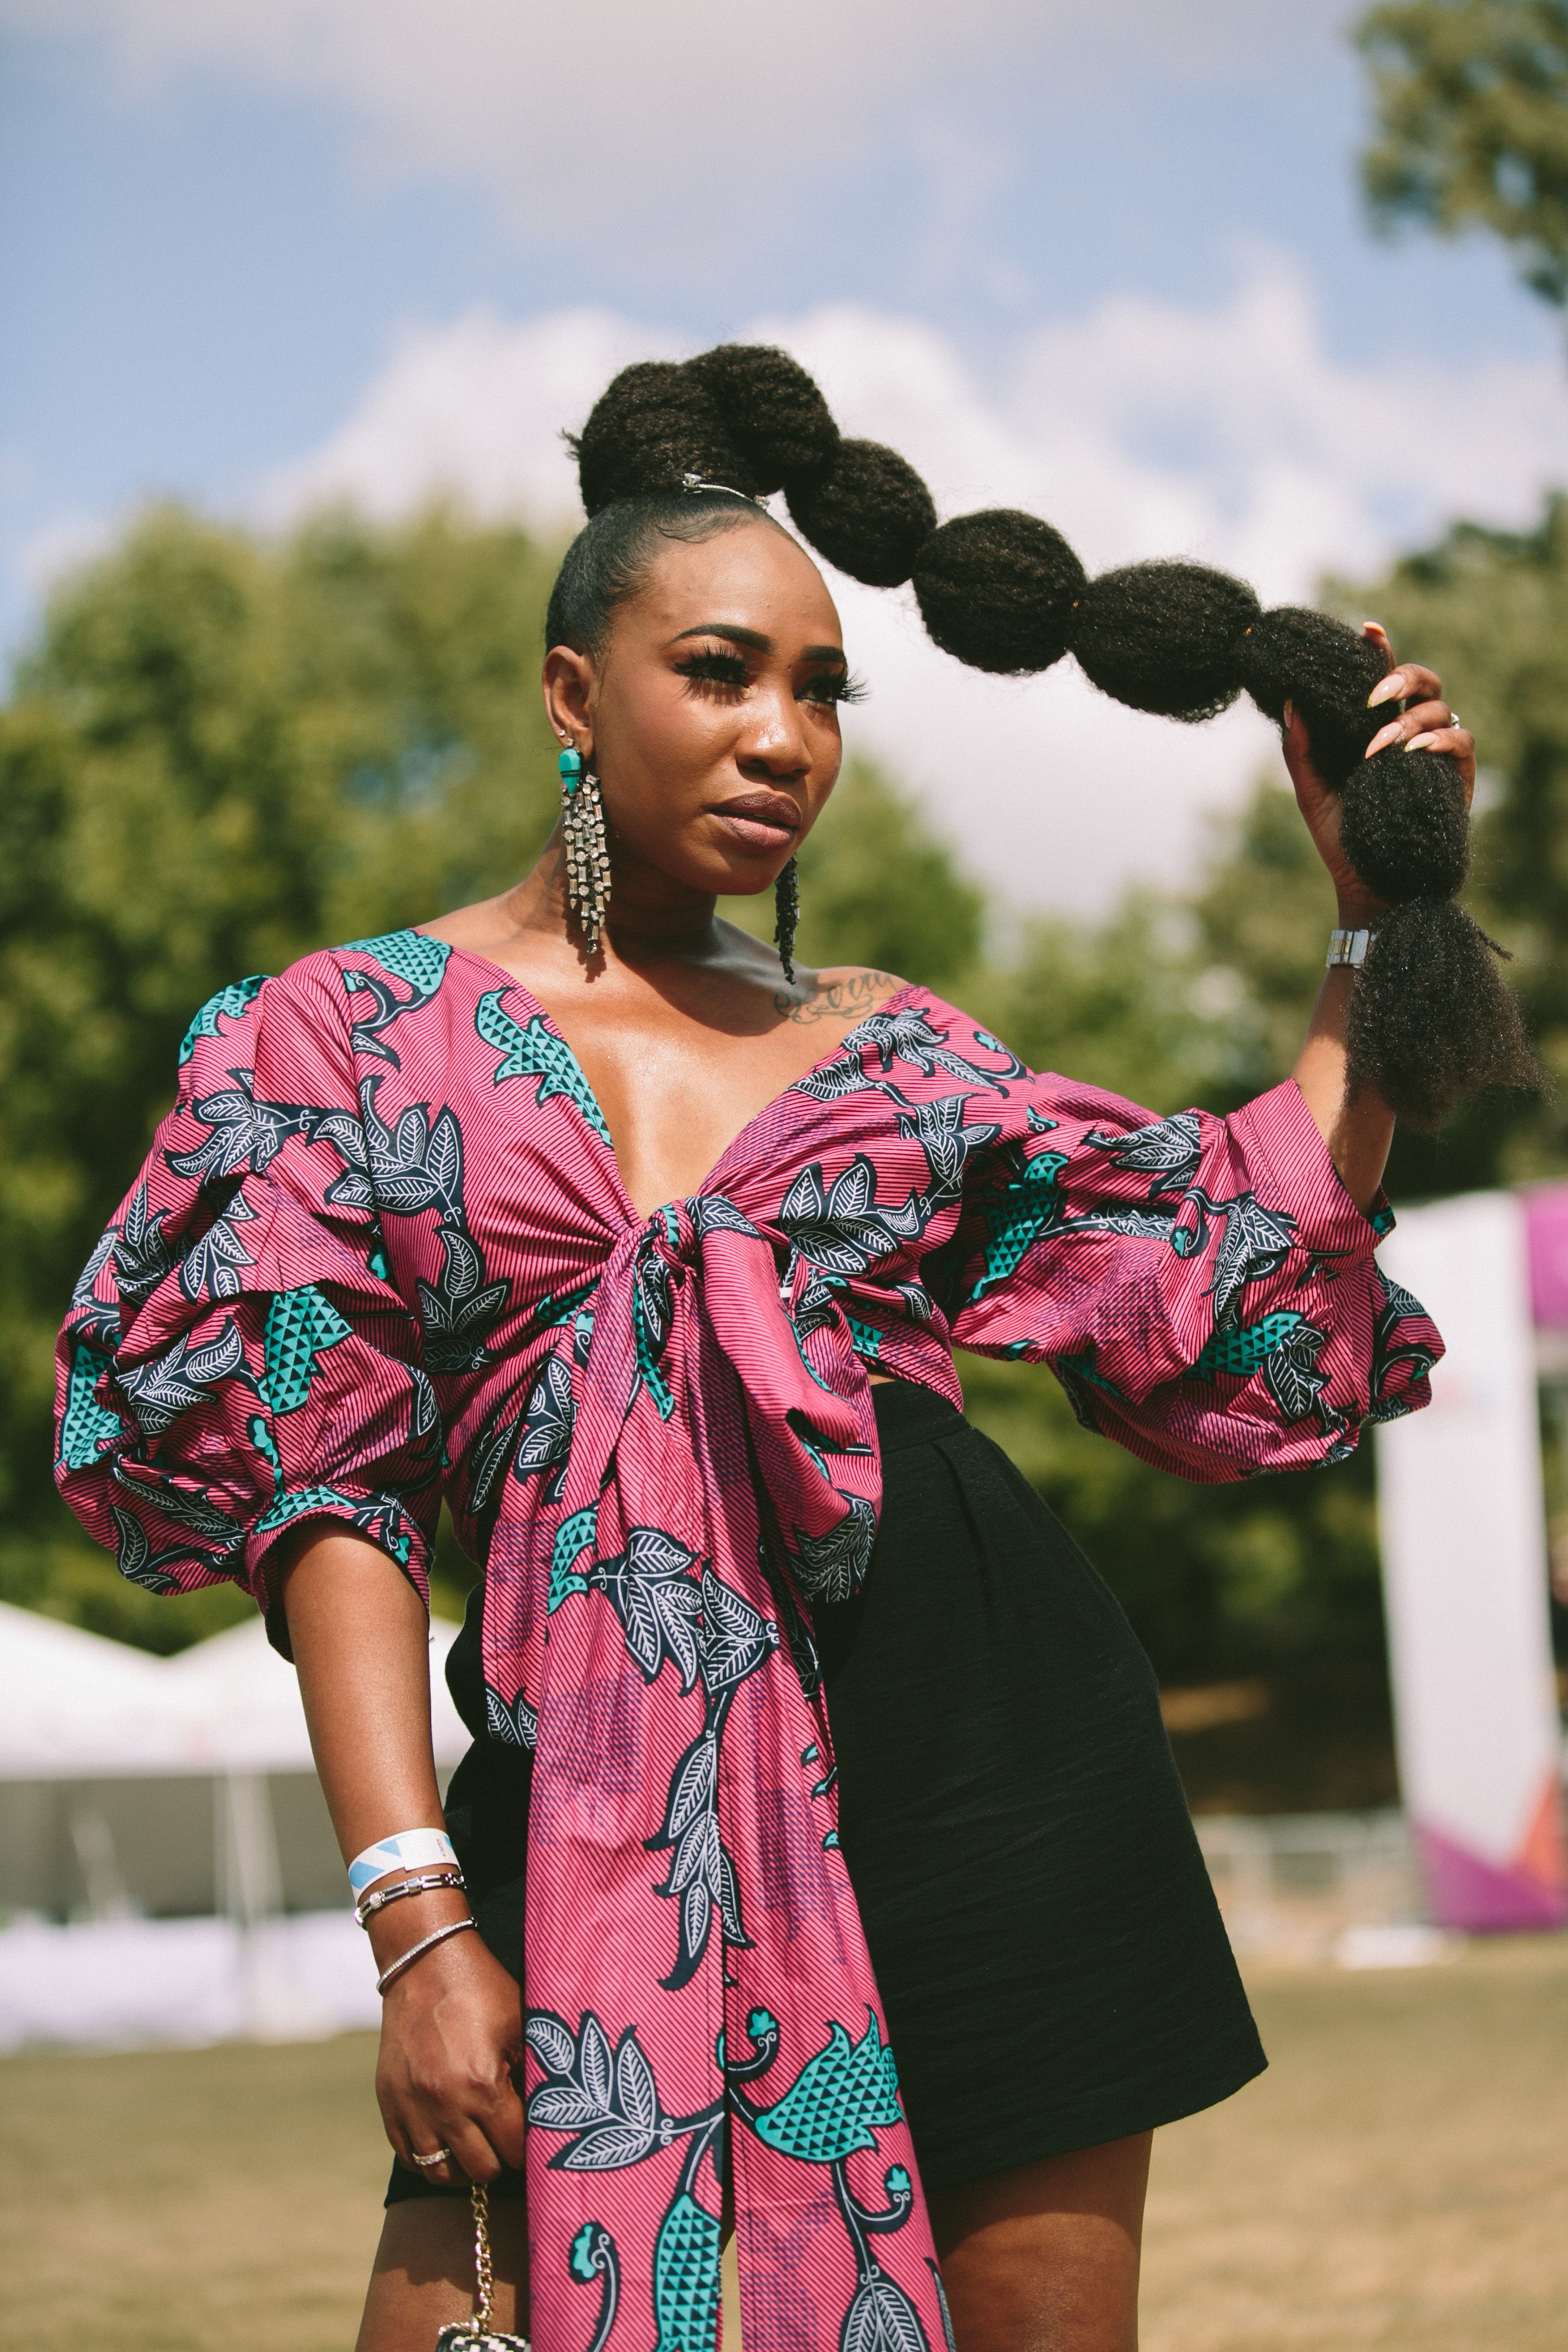 25 Creative Ponytails And Buns From Curlfest Atlanta We Want To Try